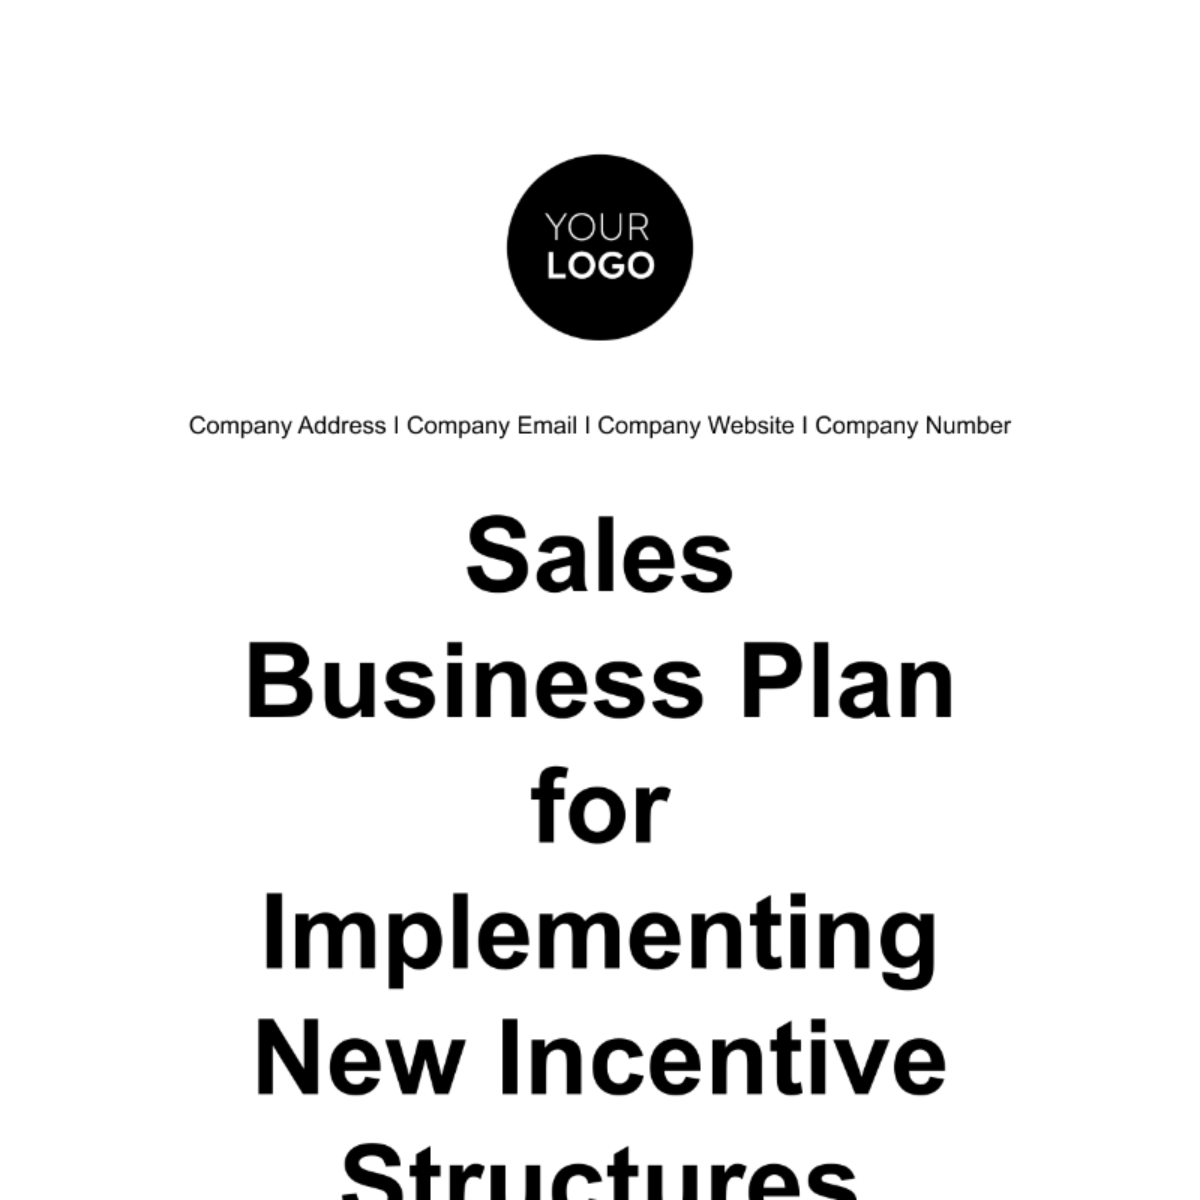 Sales Business Plan for Implementing New Incentive Structures Template